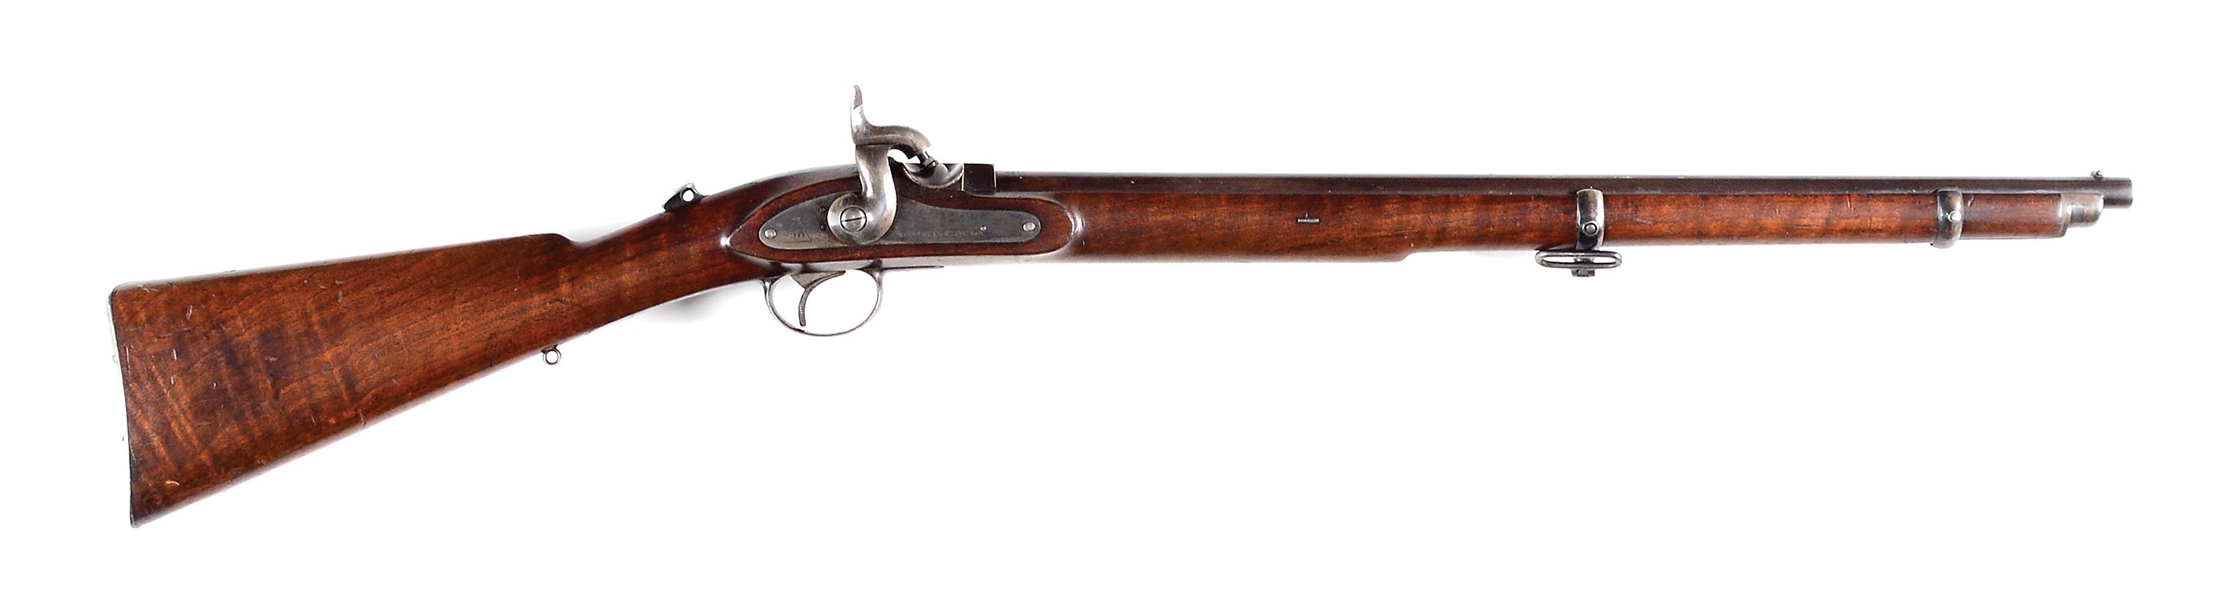 (A) WESTLEY RICHARDS MONKEY TAIL CARBINE DATED 1862.